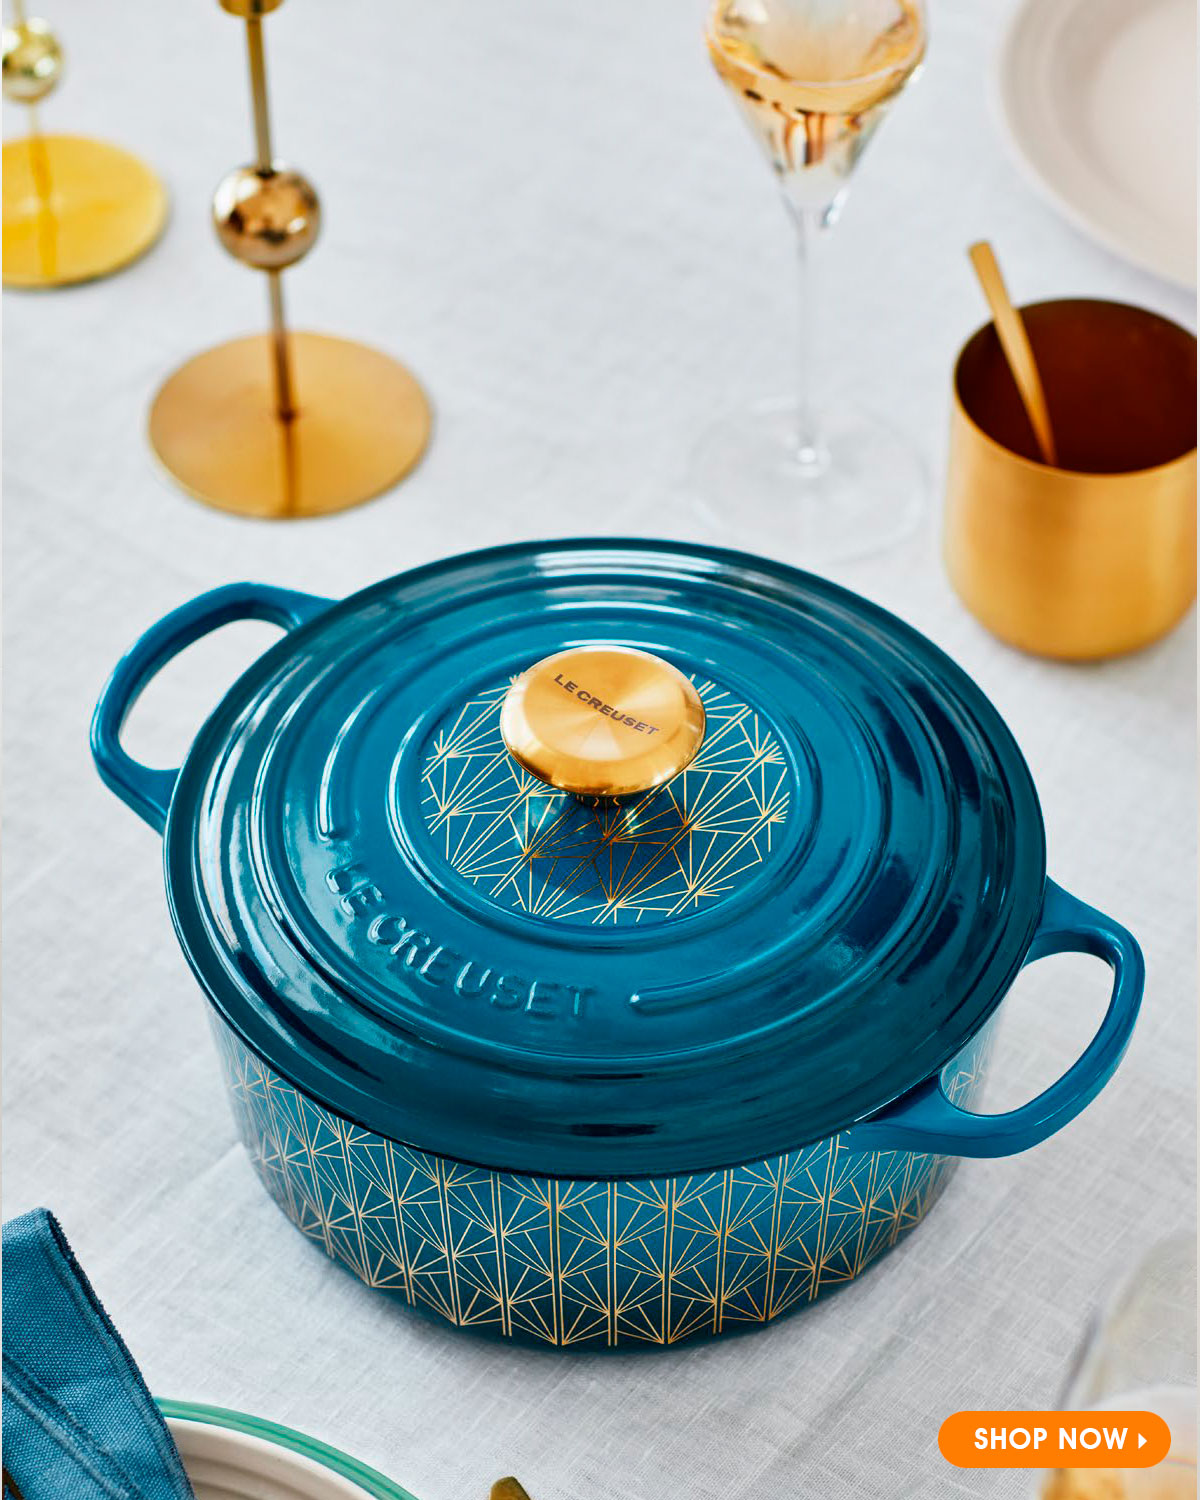 Le Creuset Limited Editions For the Le Creuset Lover Who Has Everything!